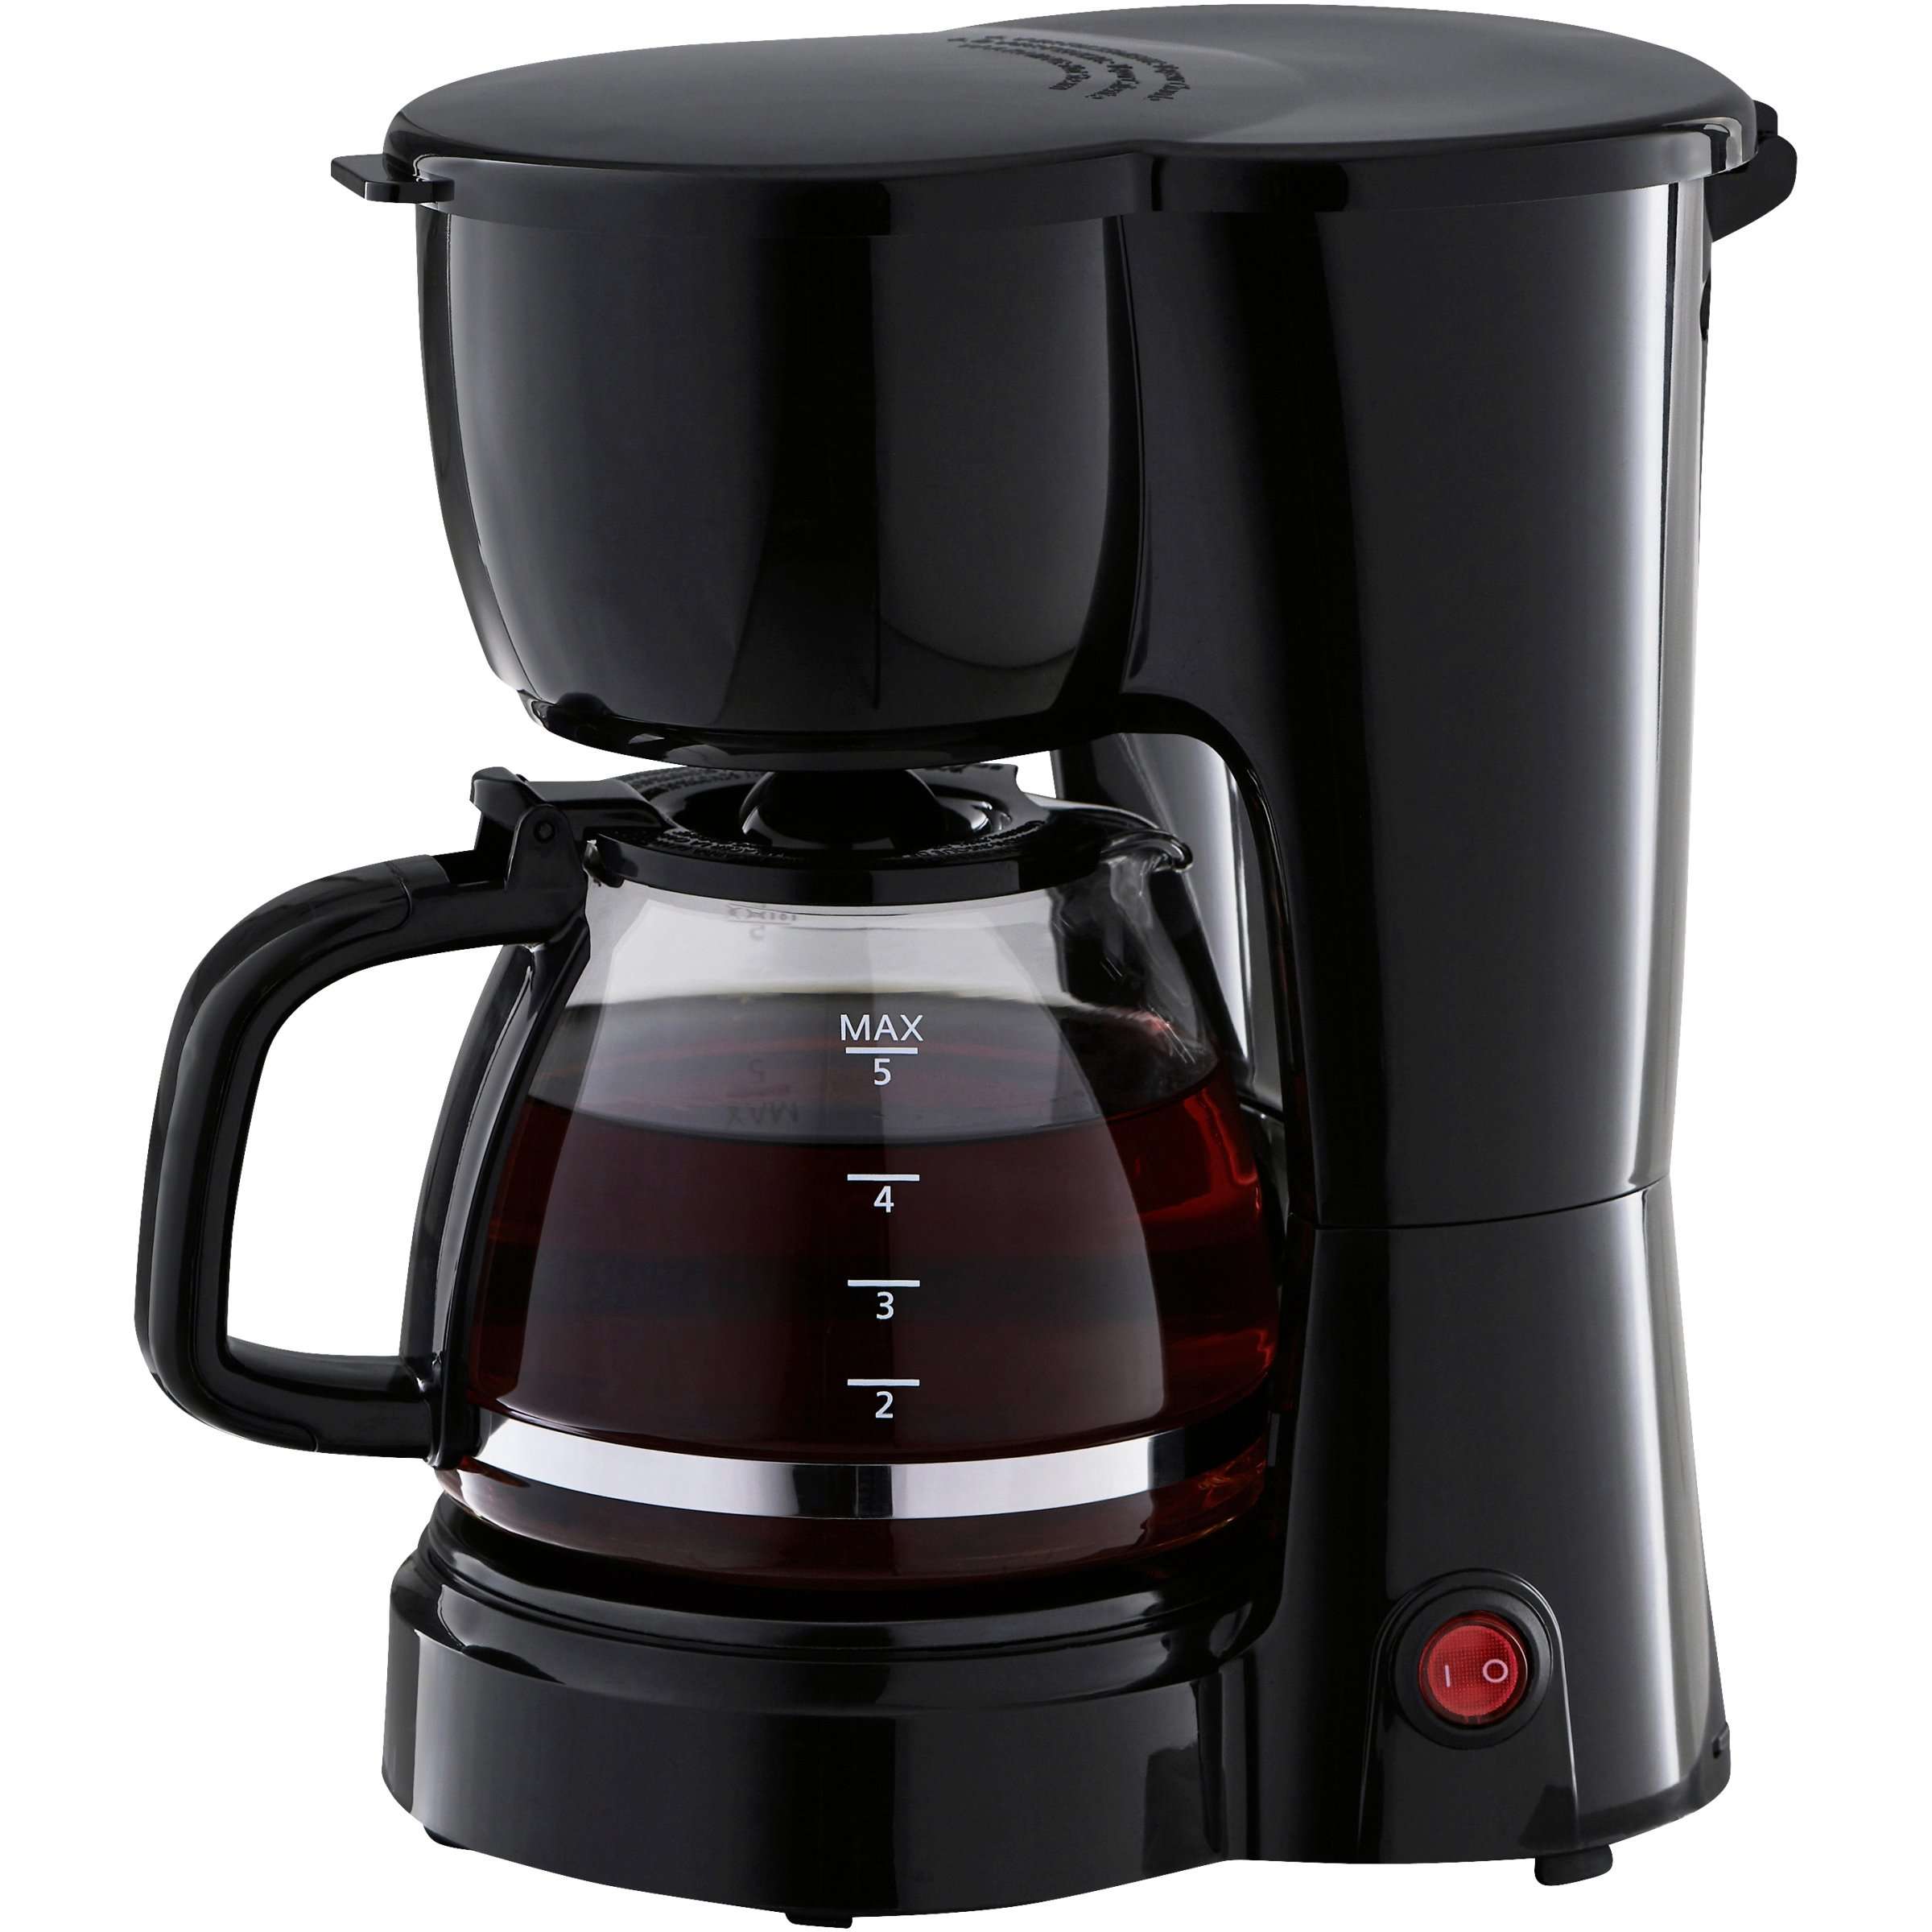 Mainstays 5 Cup Black Coffee Maker with Removable Filter ...